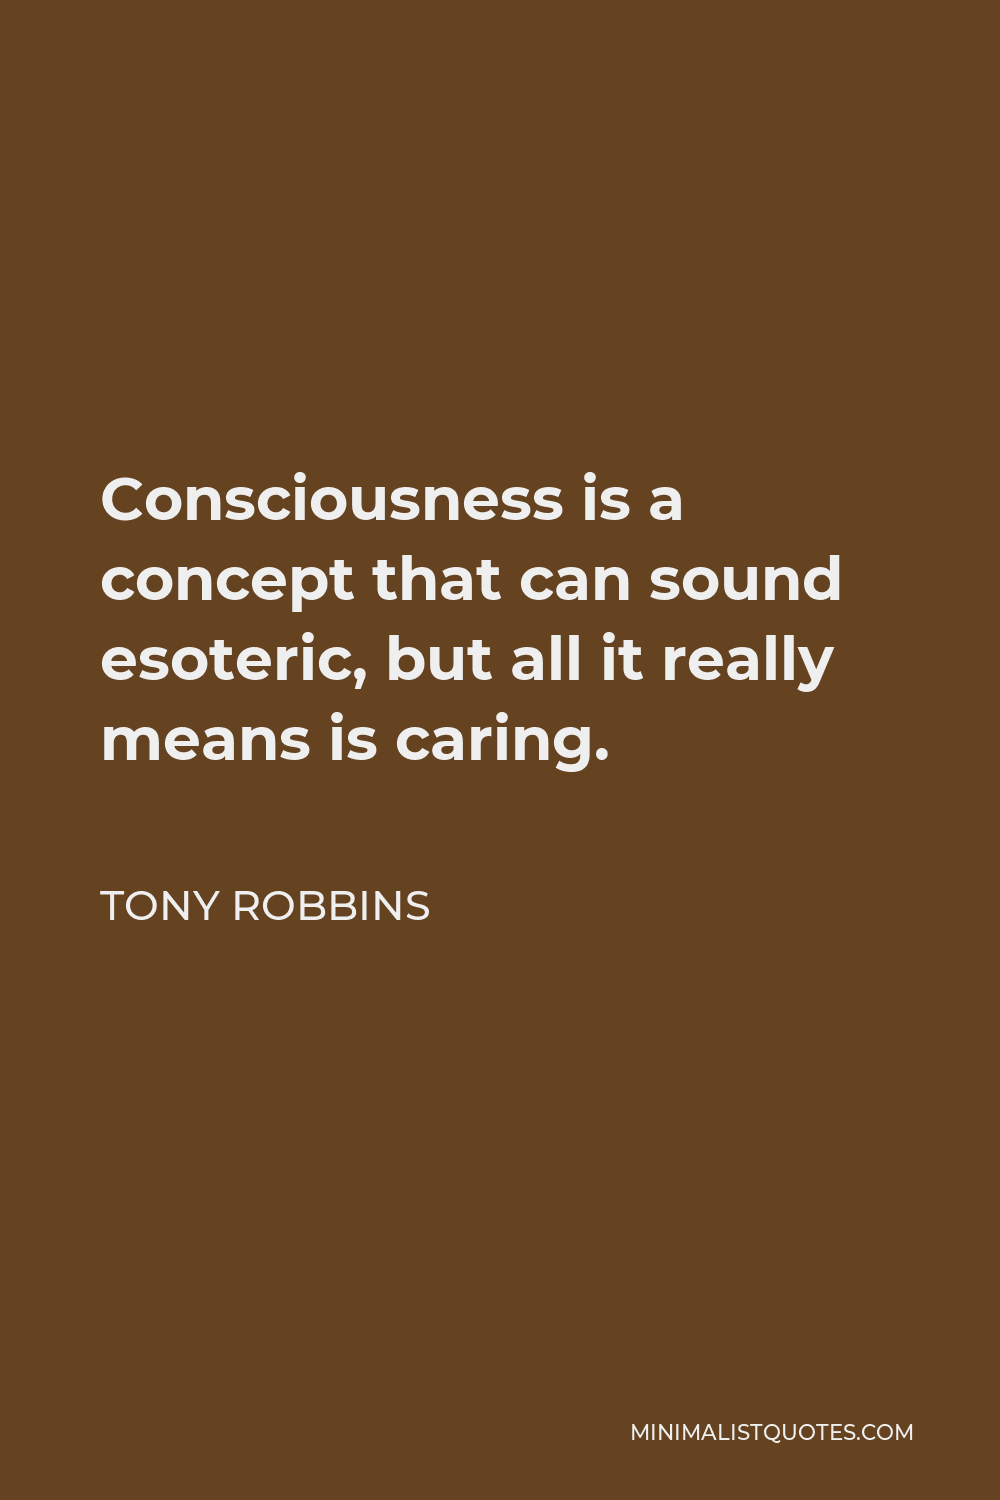 Tony Robbins Quote - Consciousness is a concept that can sound esoteric, but all it really means is caring.